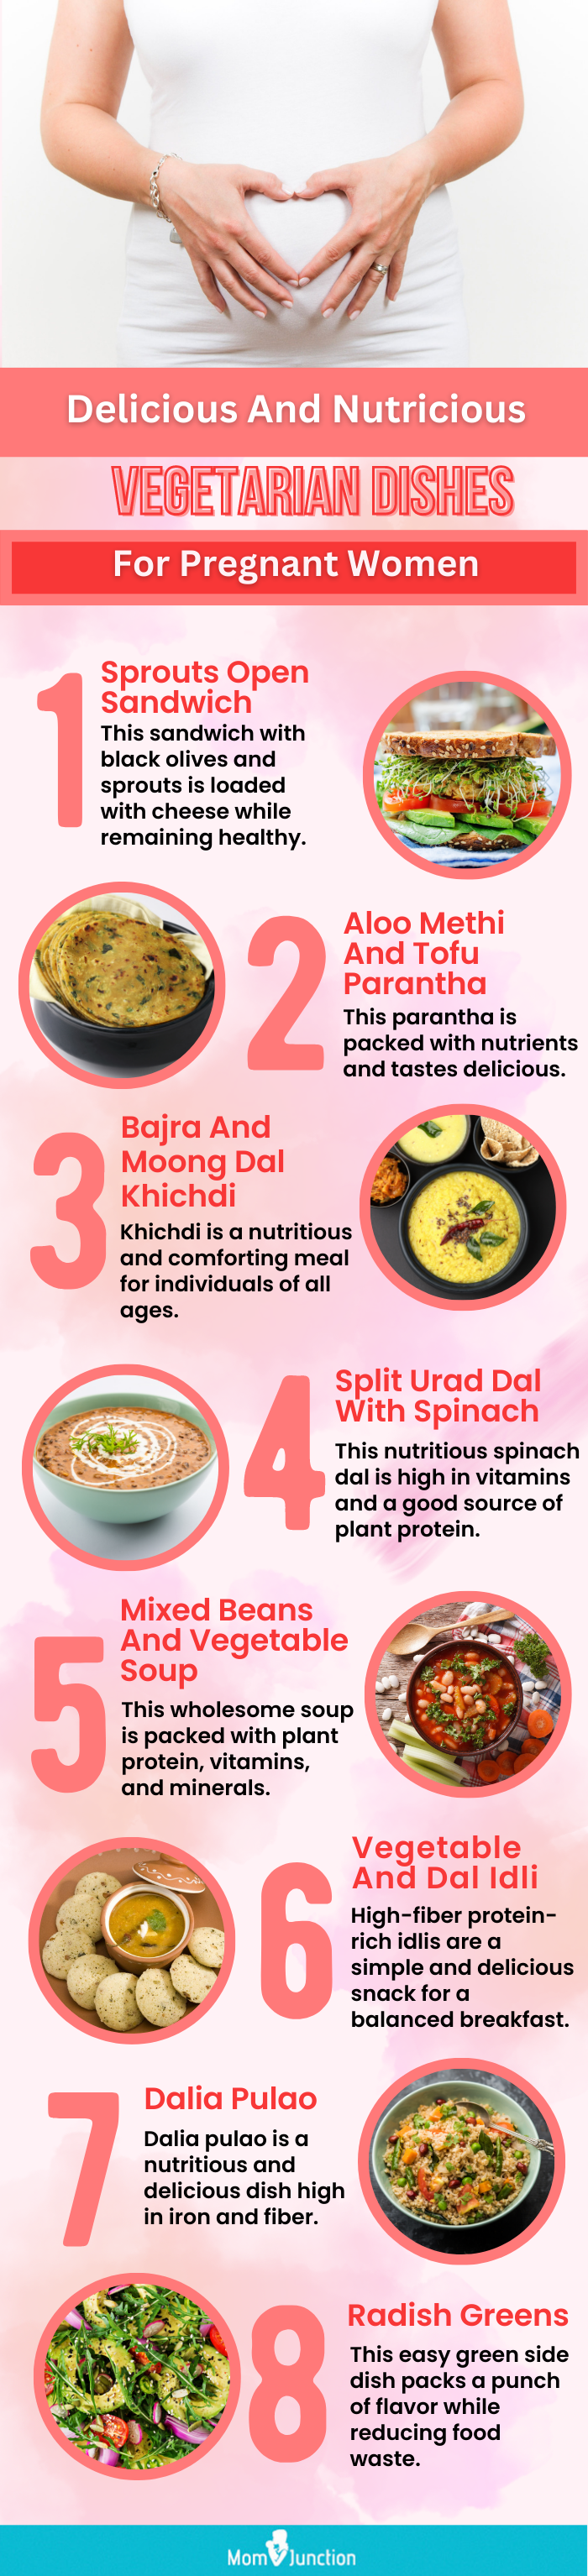 vegetarian dishes to include in your pregnancy diet (infographic)